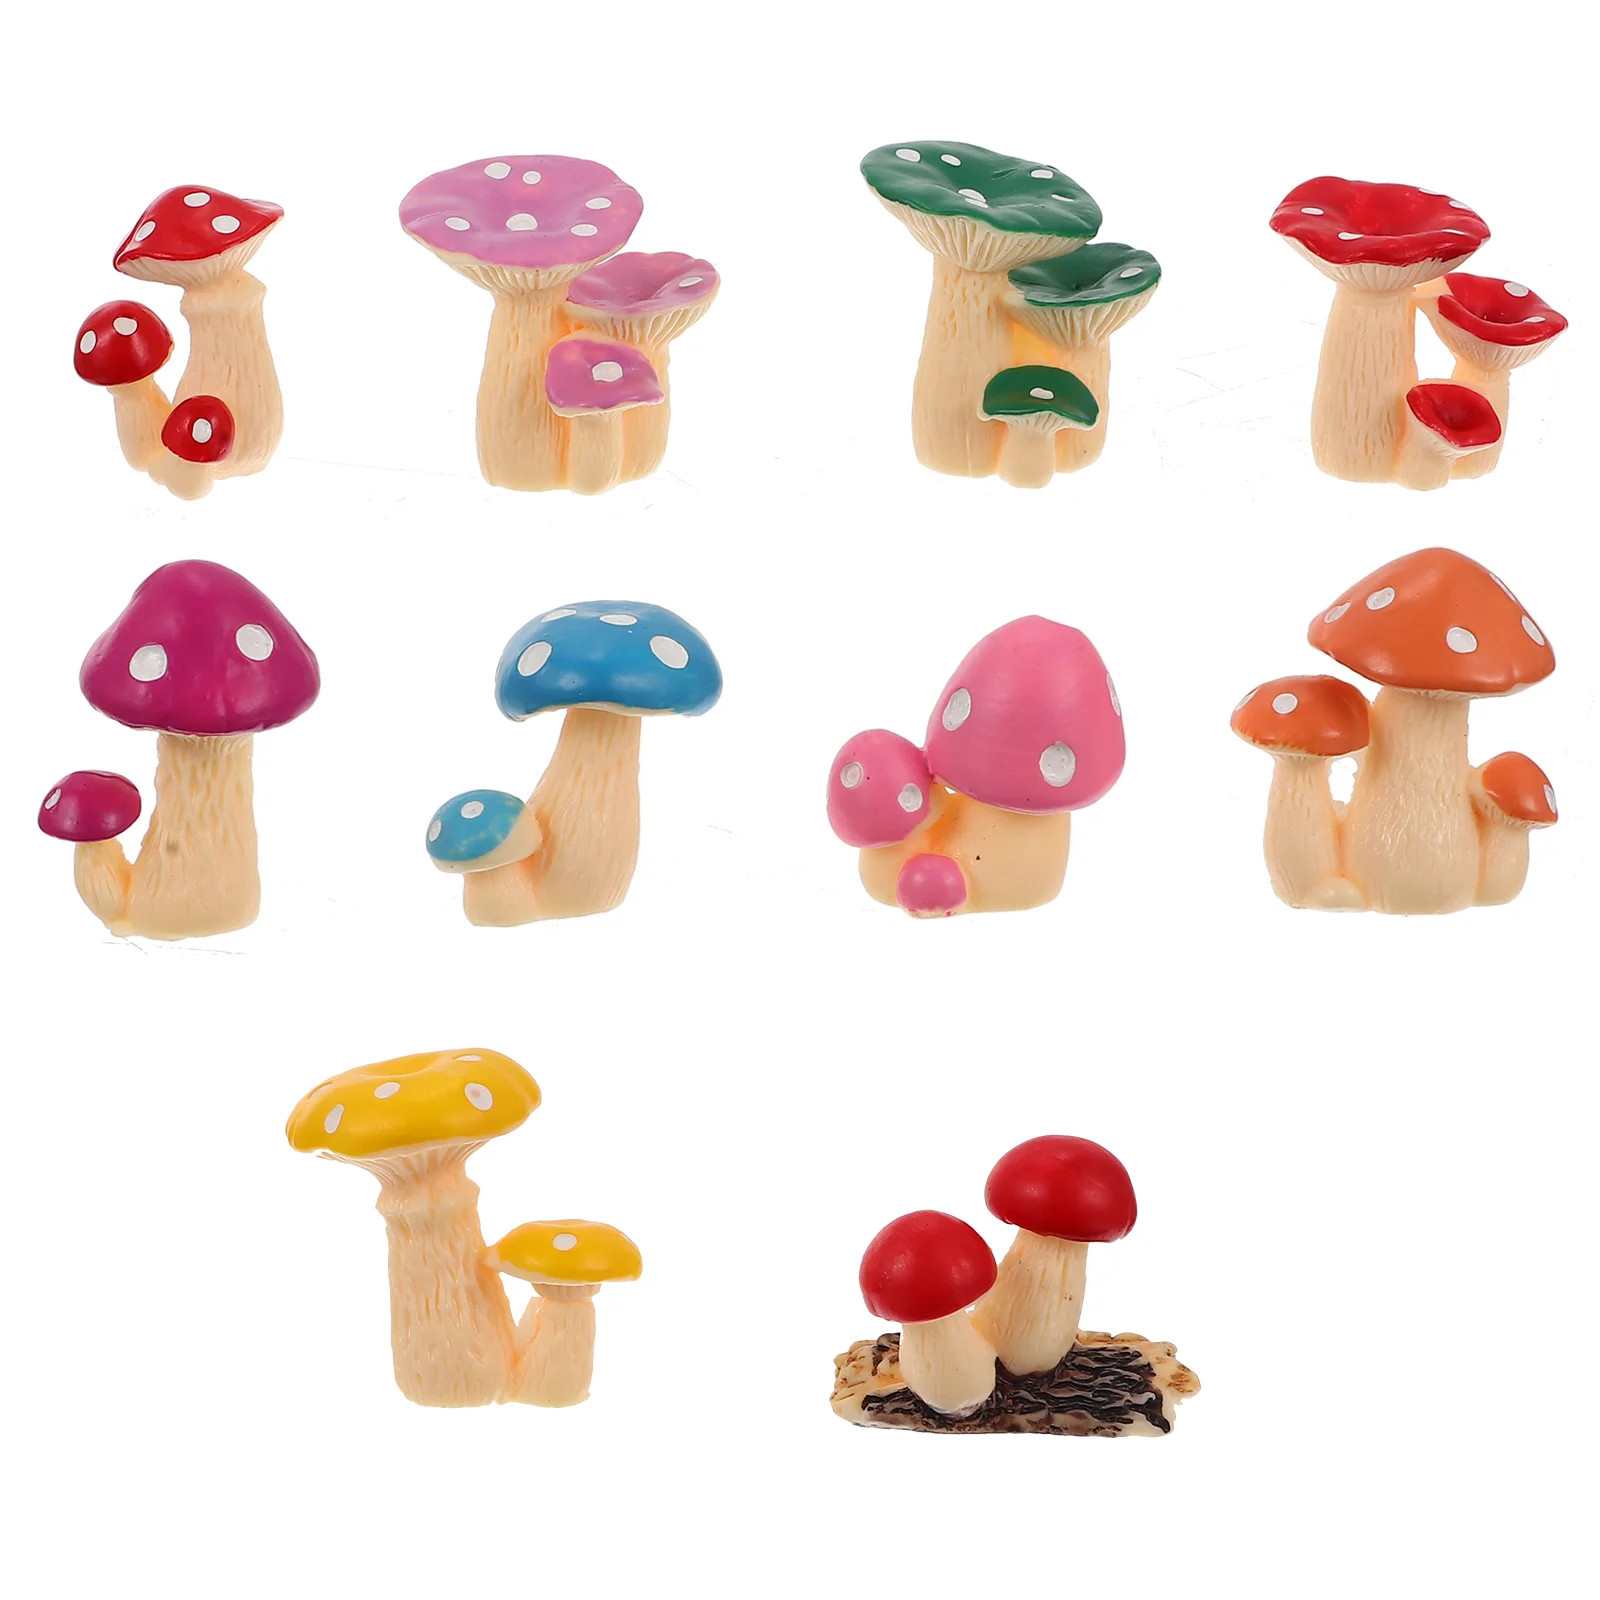 

10 Pcs Cake Toppers Simulated Mushroom Bush Lovely Tiny Fake Mushrooms Artificial Adornment Garden Ornaments Micro Landscape